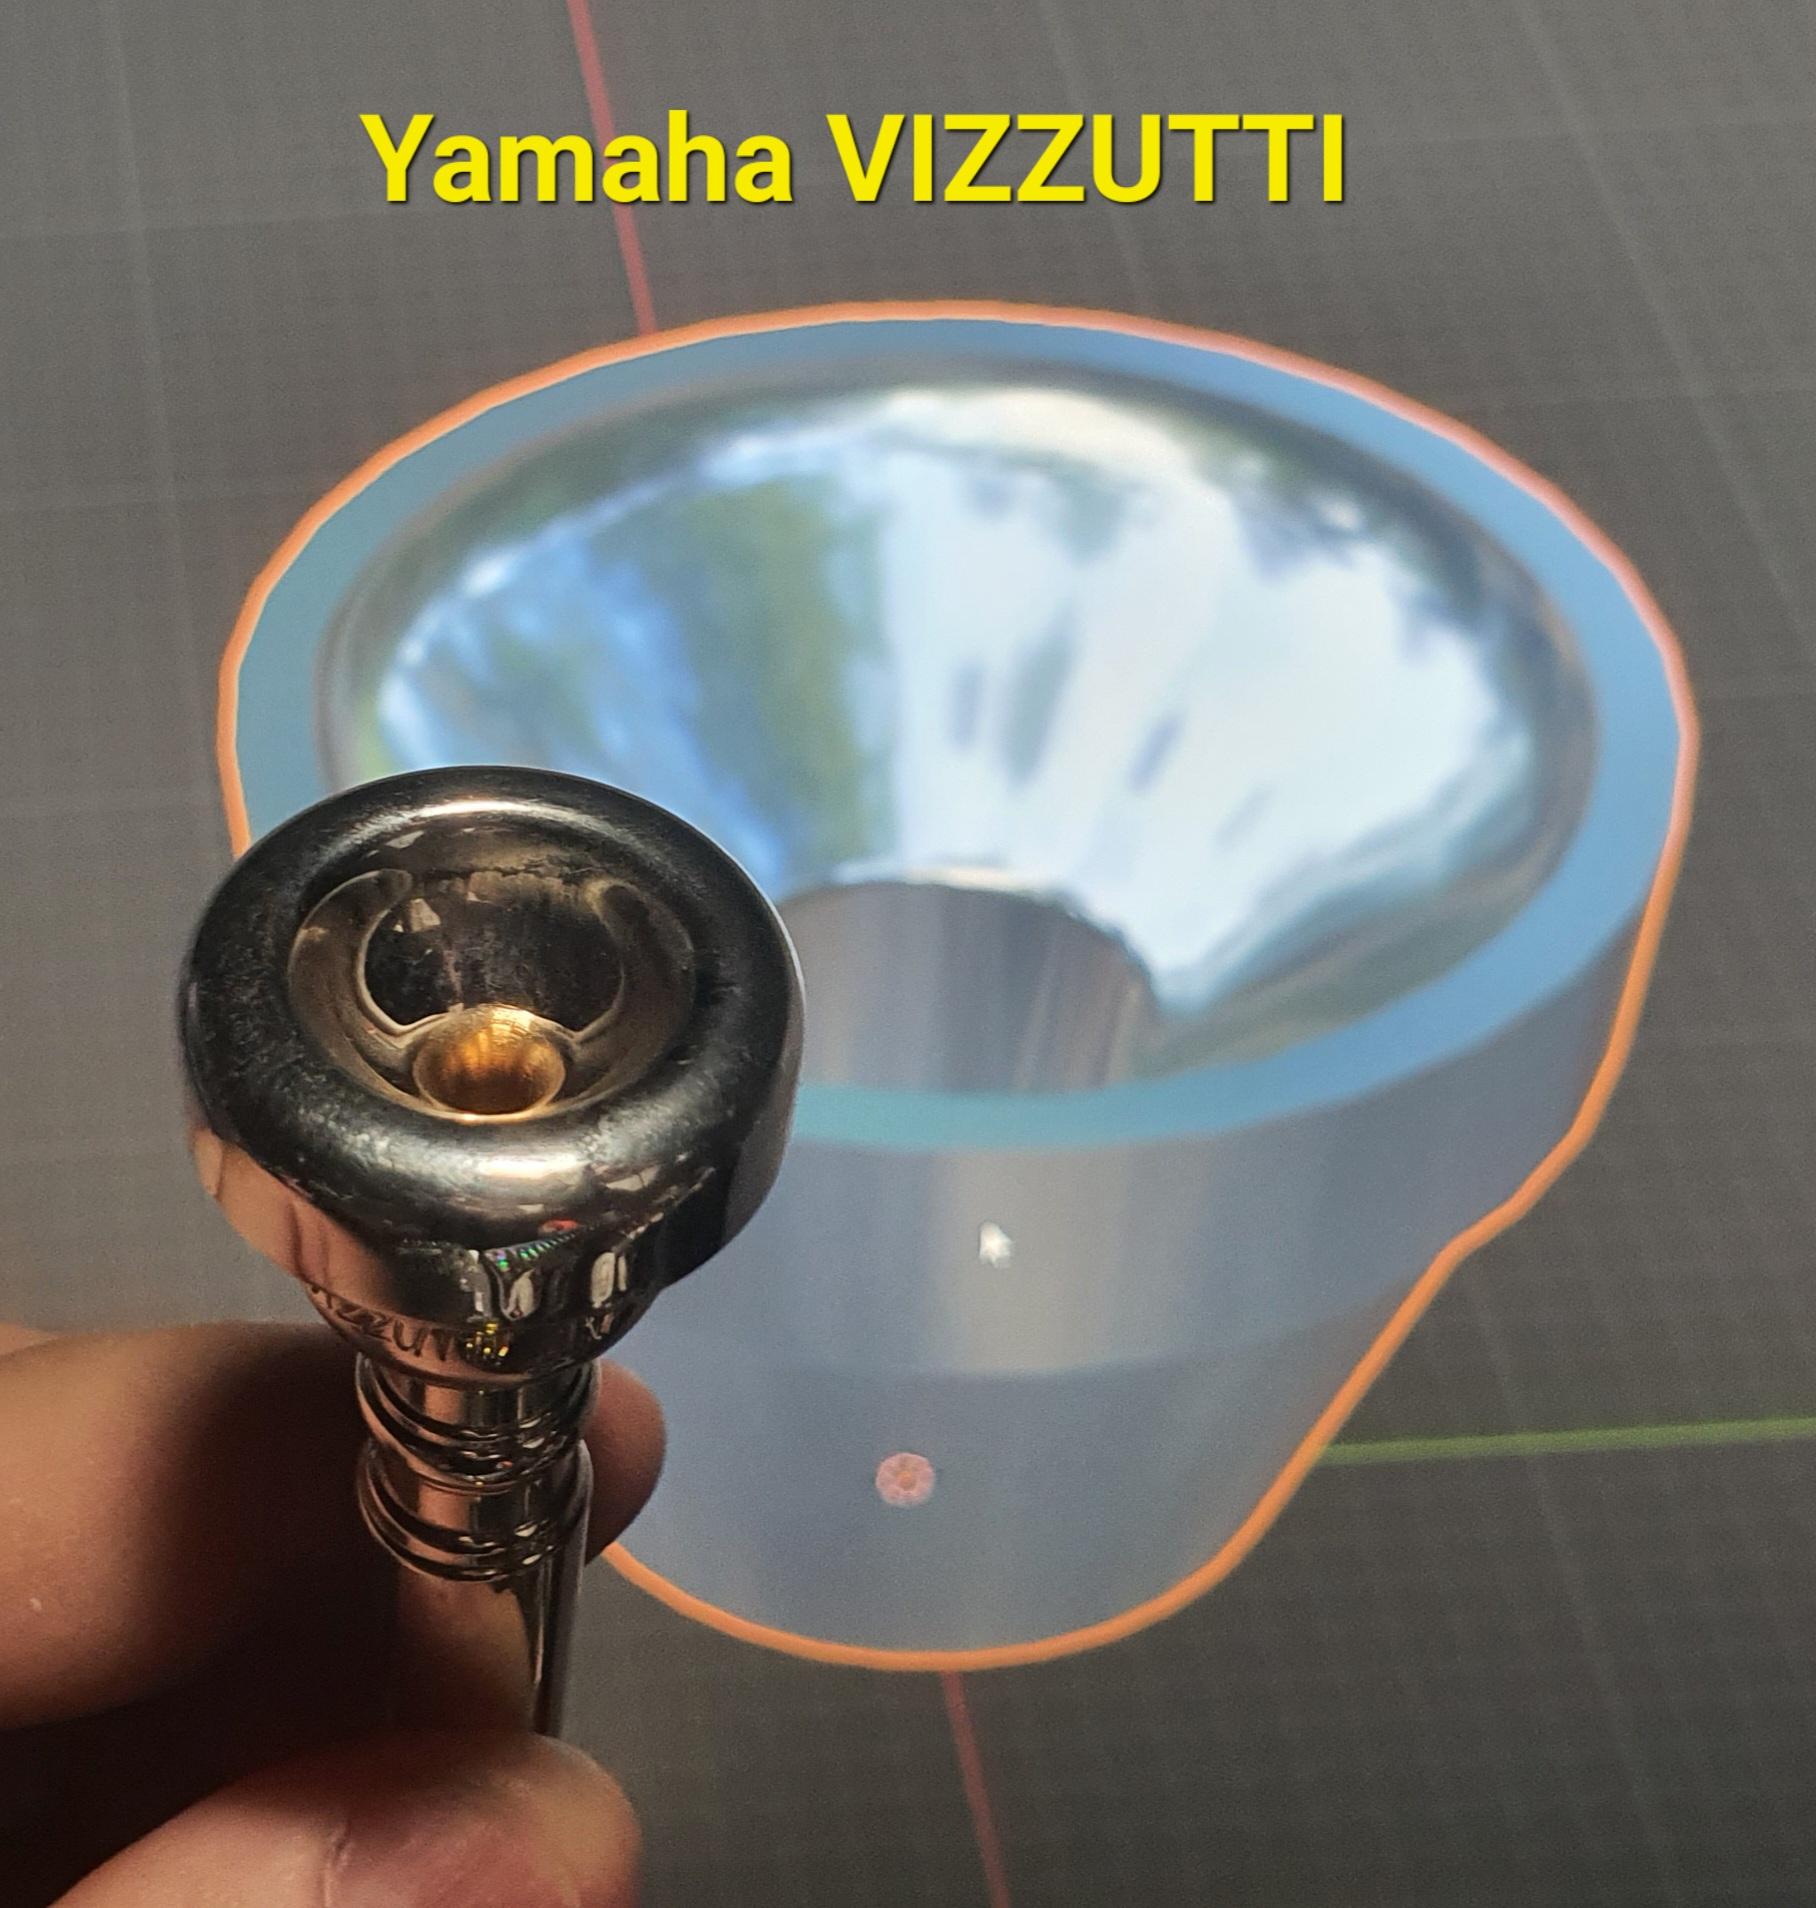 Trumpet MP Adaptor for Multipiece Mouthpiece - Version 2 with V Cup design similar to Yamaha Vizzutti that I have. But has more of a V shape. - 3d model